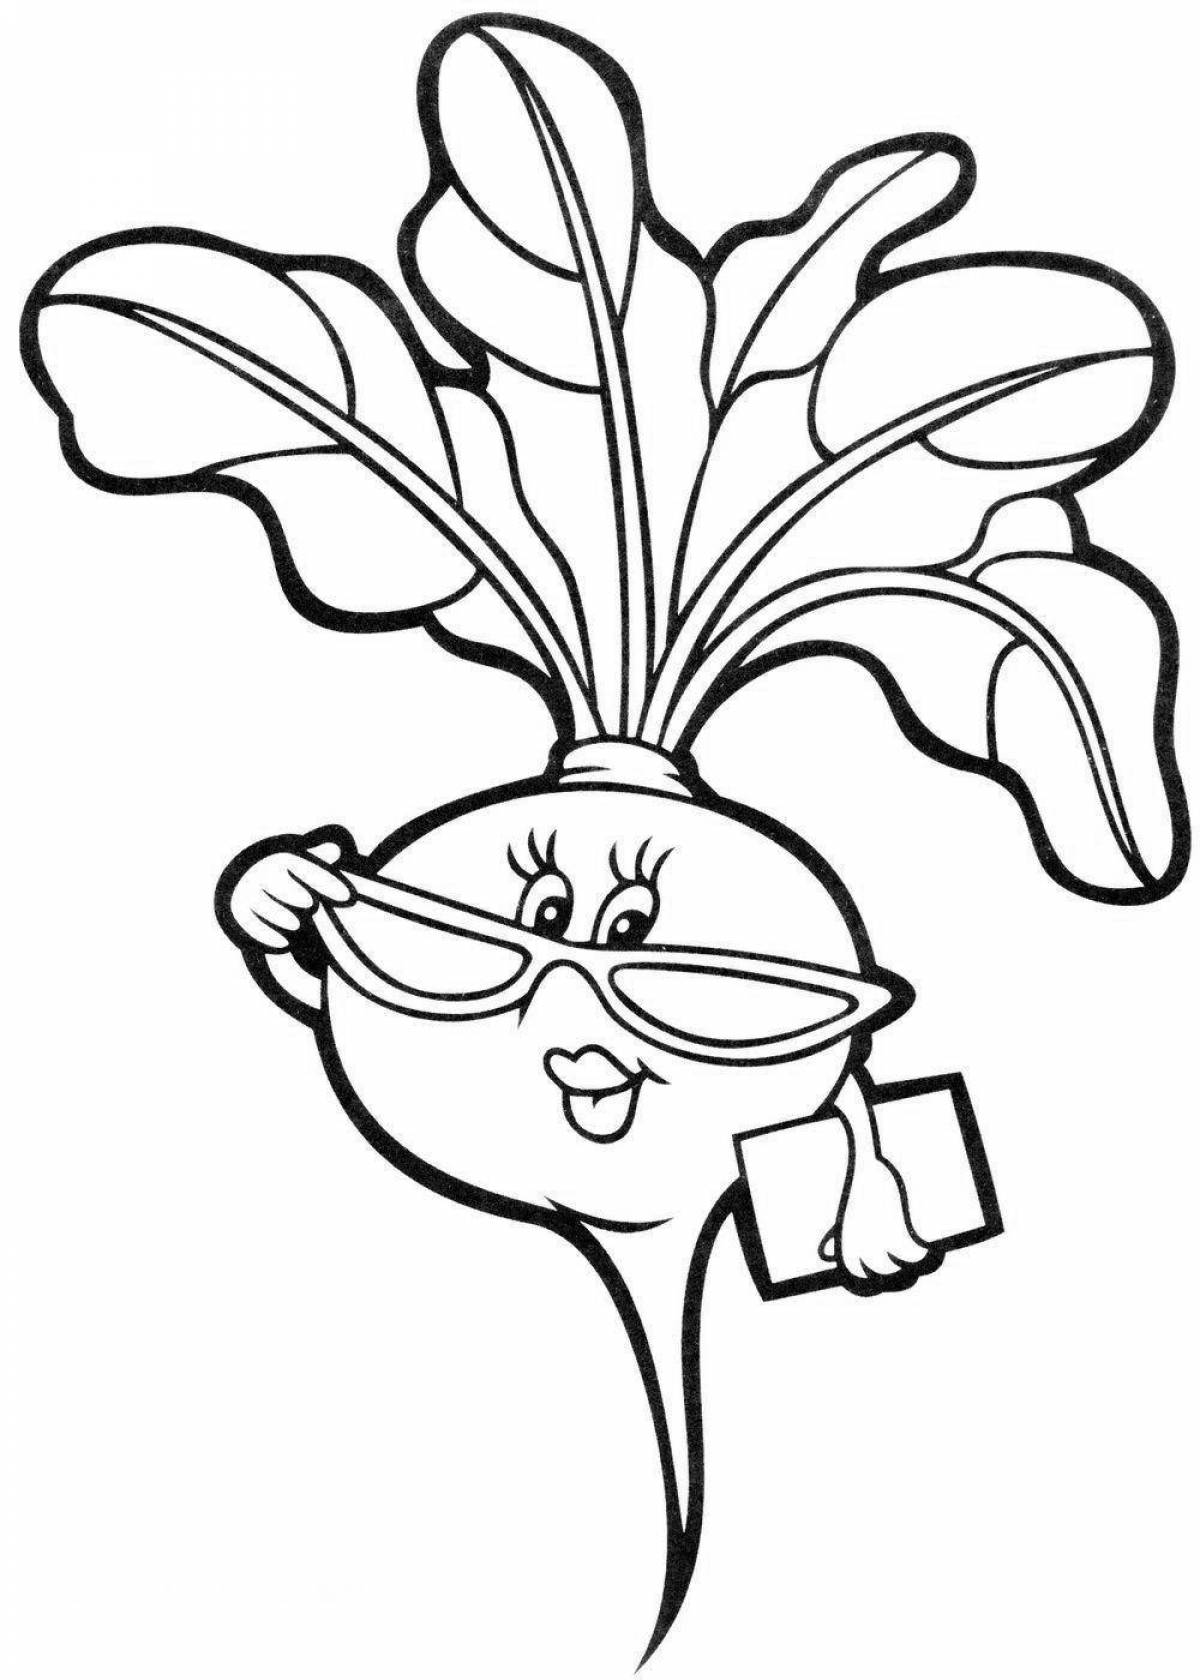 Clear radish coloring page